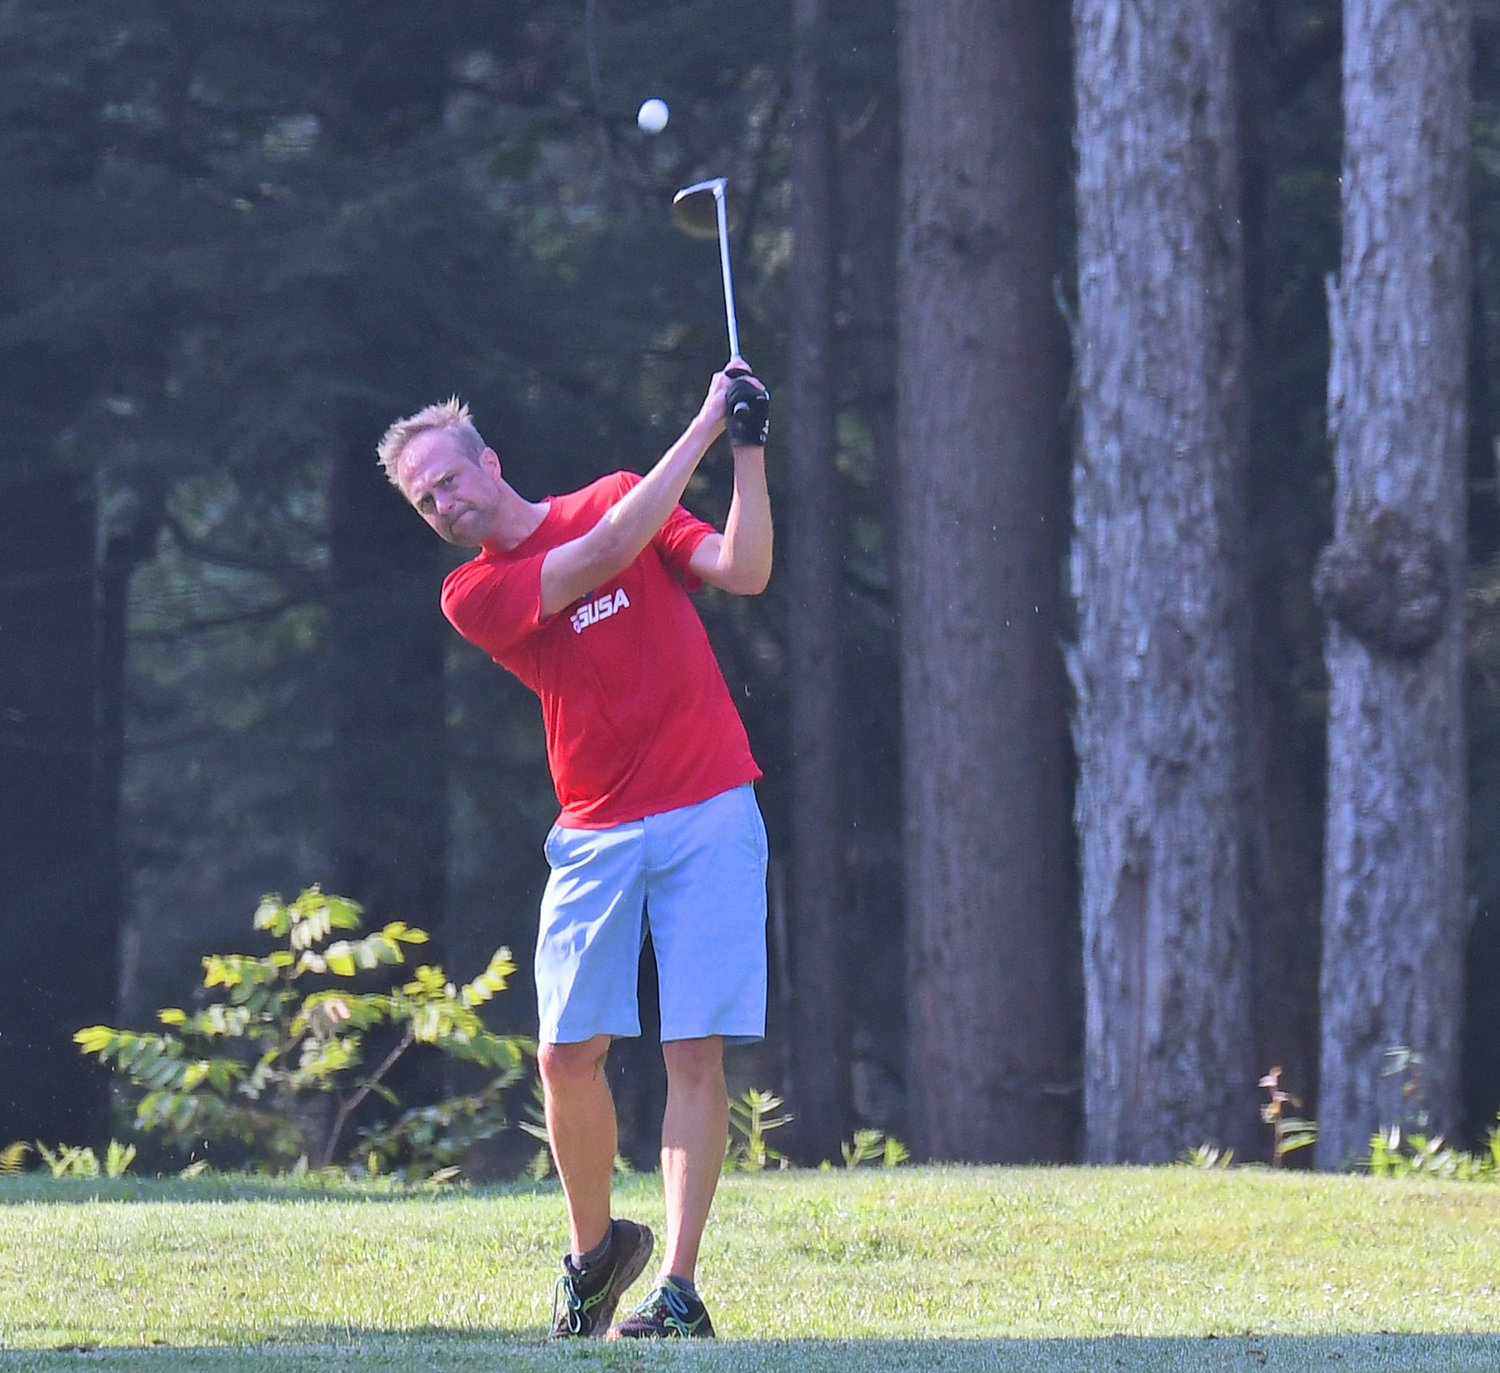 Speedgolfer Wes Cupp tees off on the 13th hole during the New York Speedgolf Open at Rome Country Club Monday morning. Cupp won the tournament by 10 minutes over Ireland’s Rob Hogan.